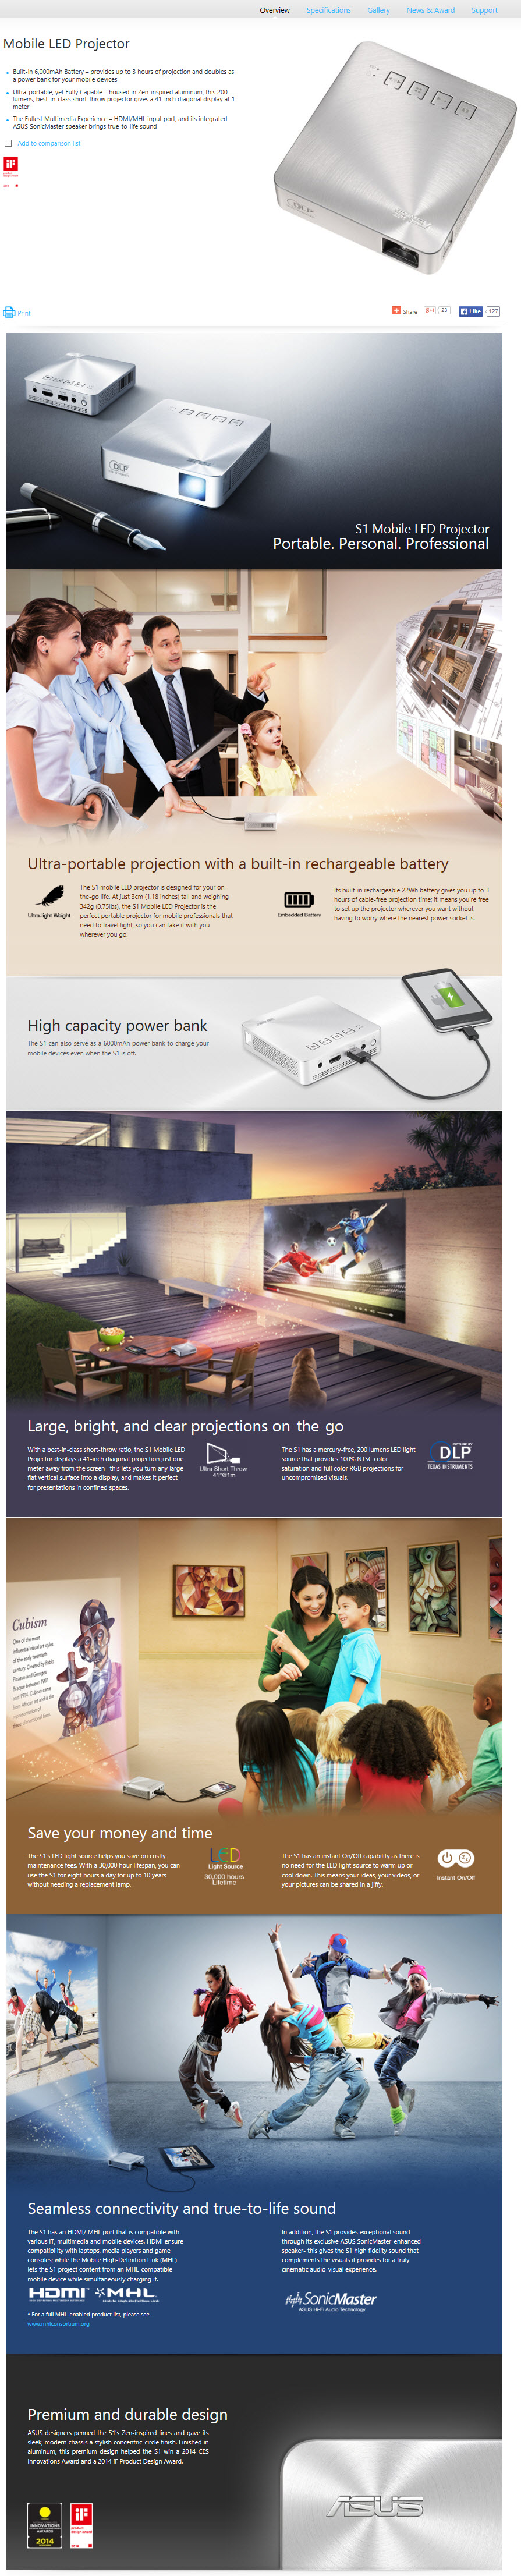 s11 ASUS S1 Mobile LED Projector Review